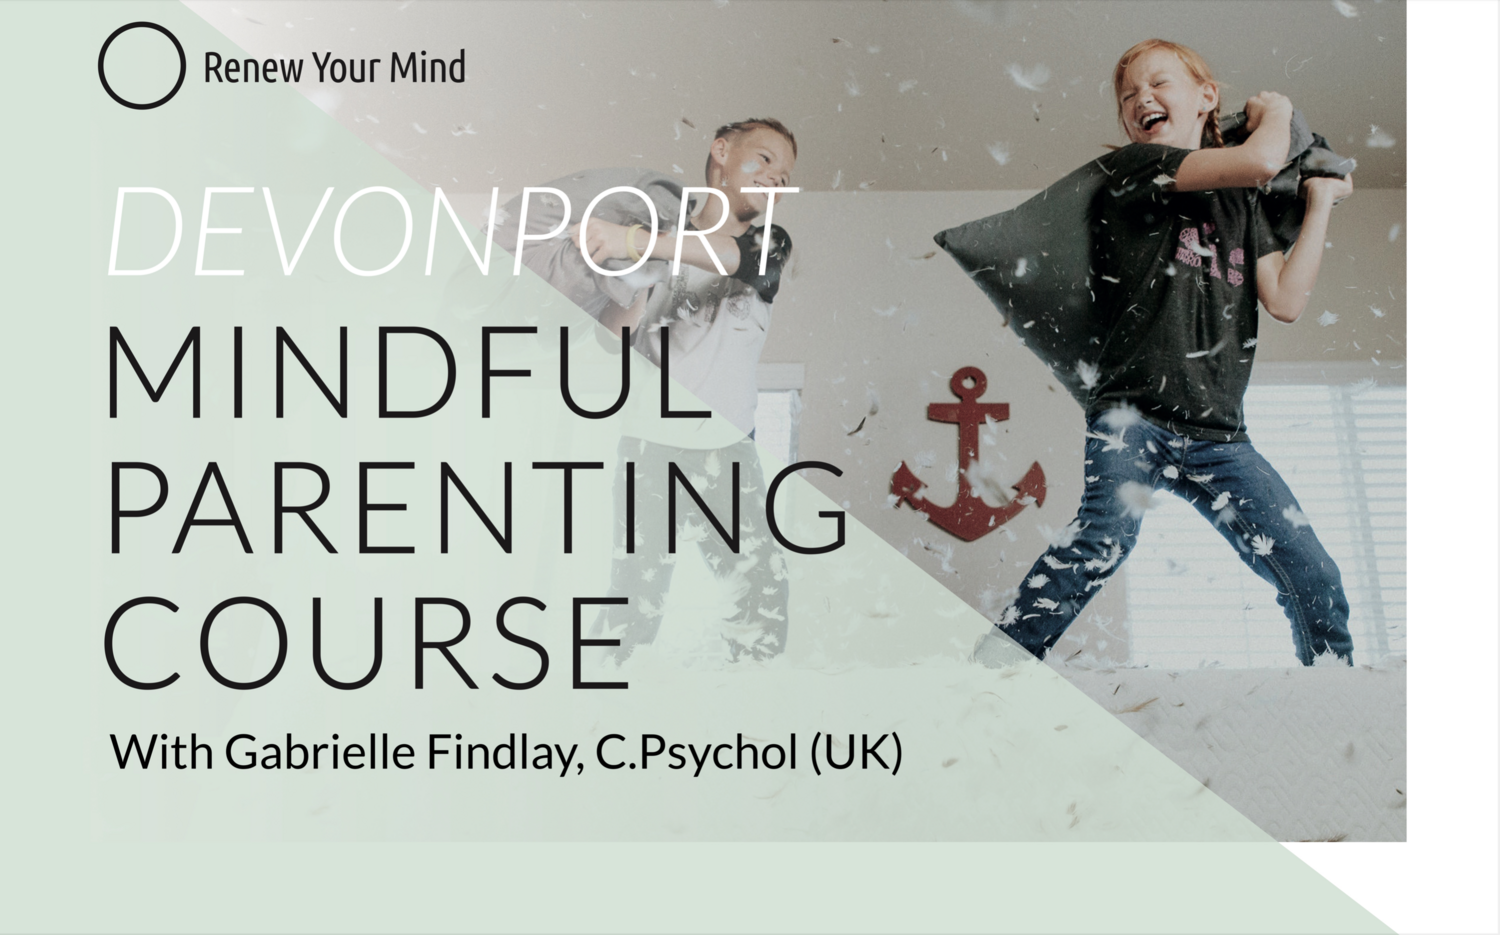 Devonport Mindful Parenting course: 6 session course starting 18 August '21